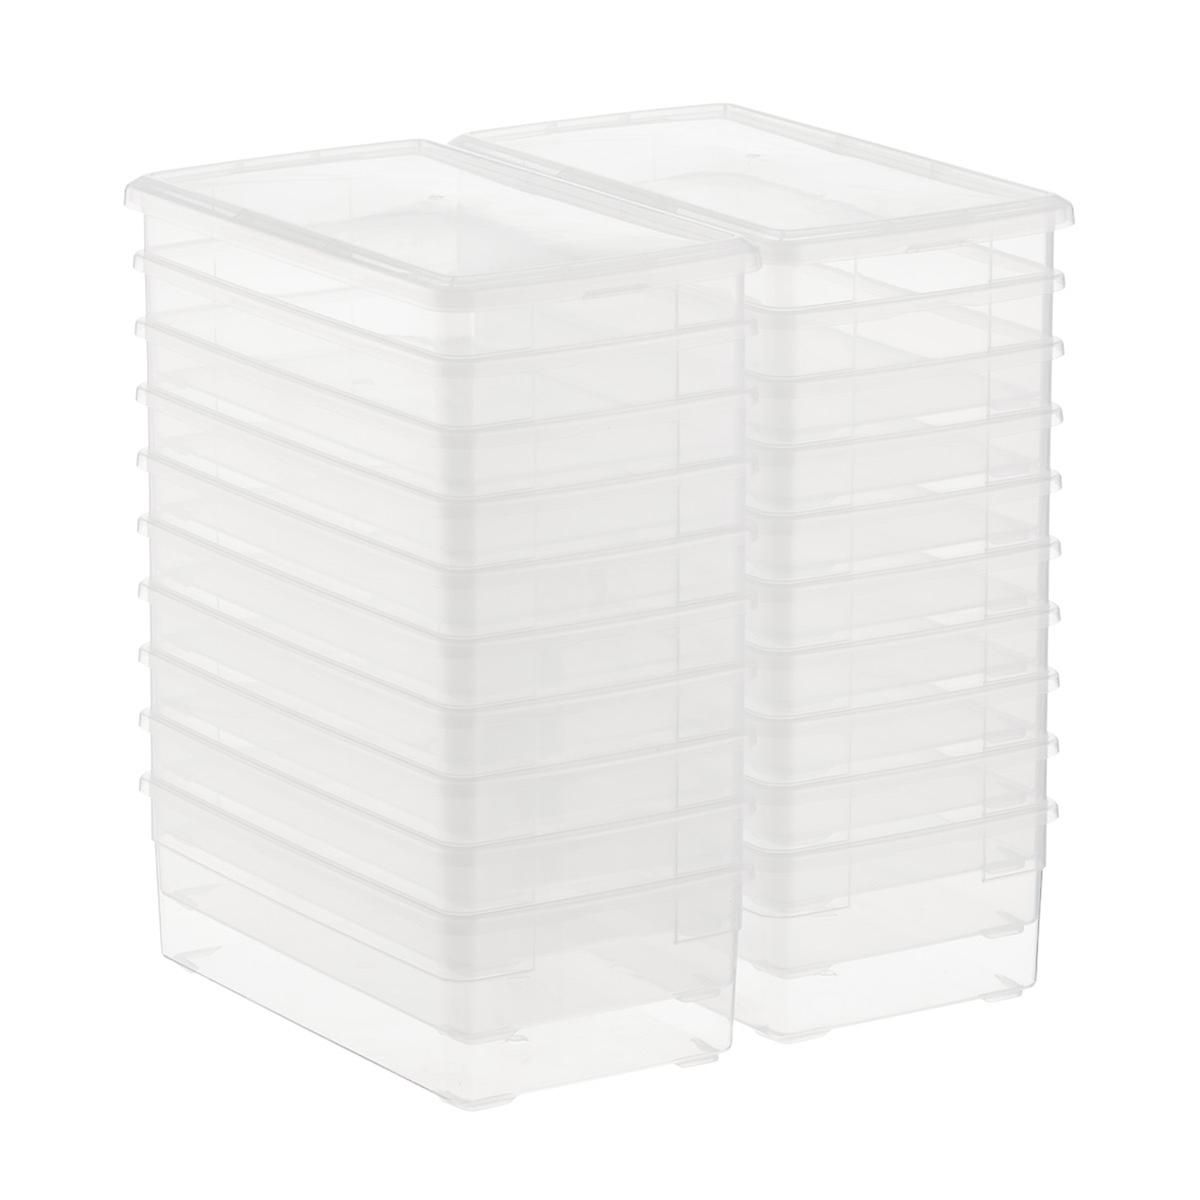 Case of 5 Our Shoe Box | The Container Store